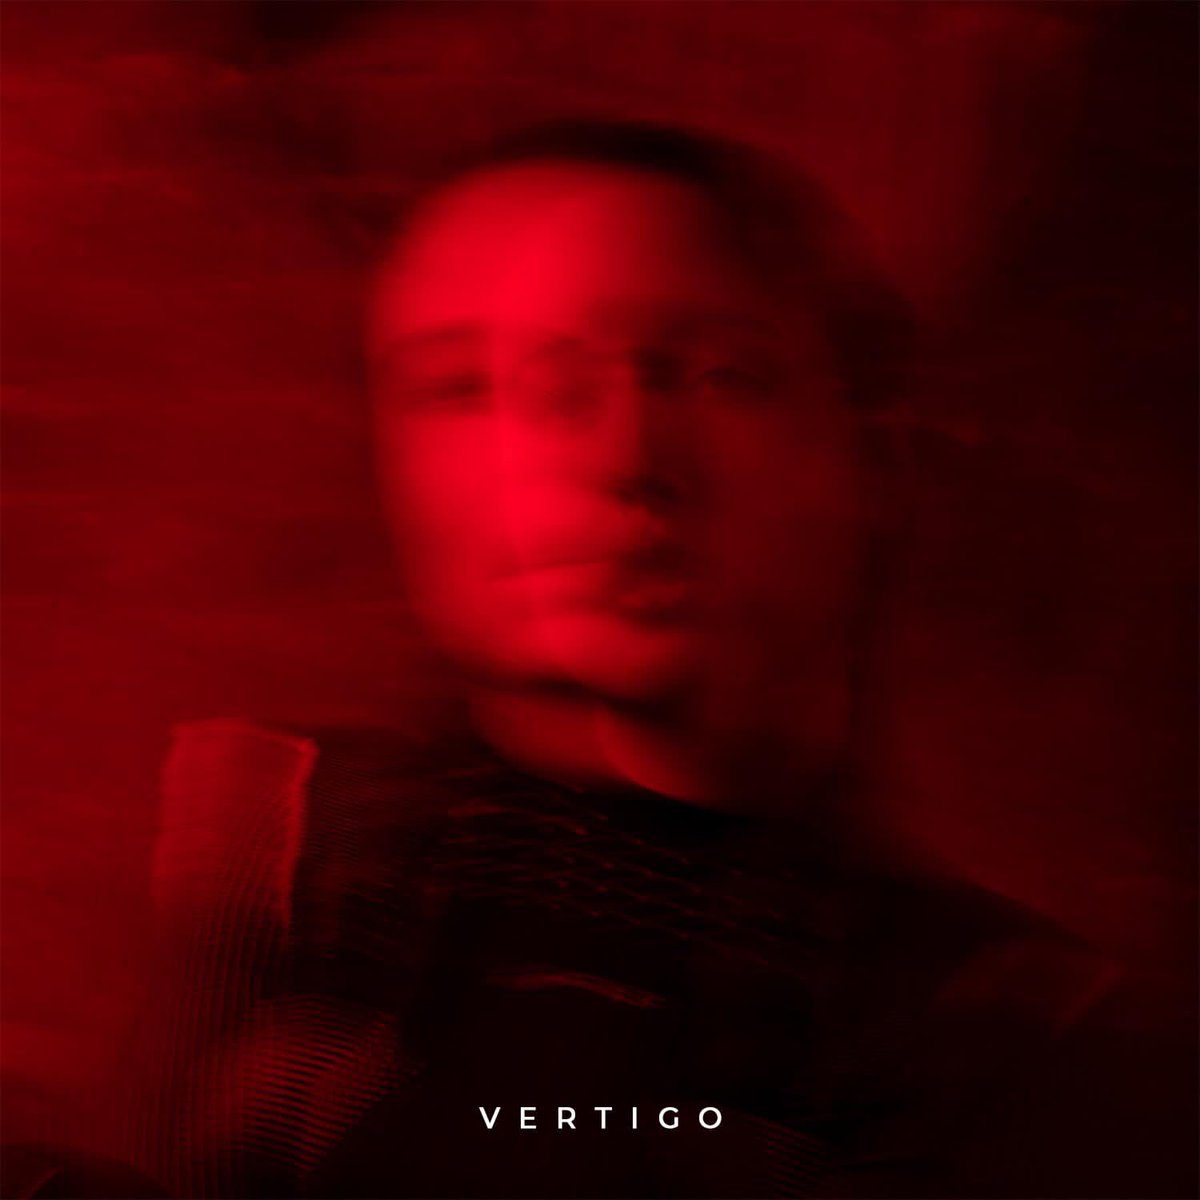 Excited to finally announce that I’ll be releasing Vertigo on April 9th! It’s been such a long time since I’ve released music, but I wanted to take the time to really create music I love! Pre-save here : alice-merton.fanlink.to/VertigoPreSave Xxx